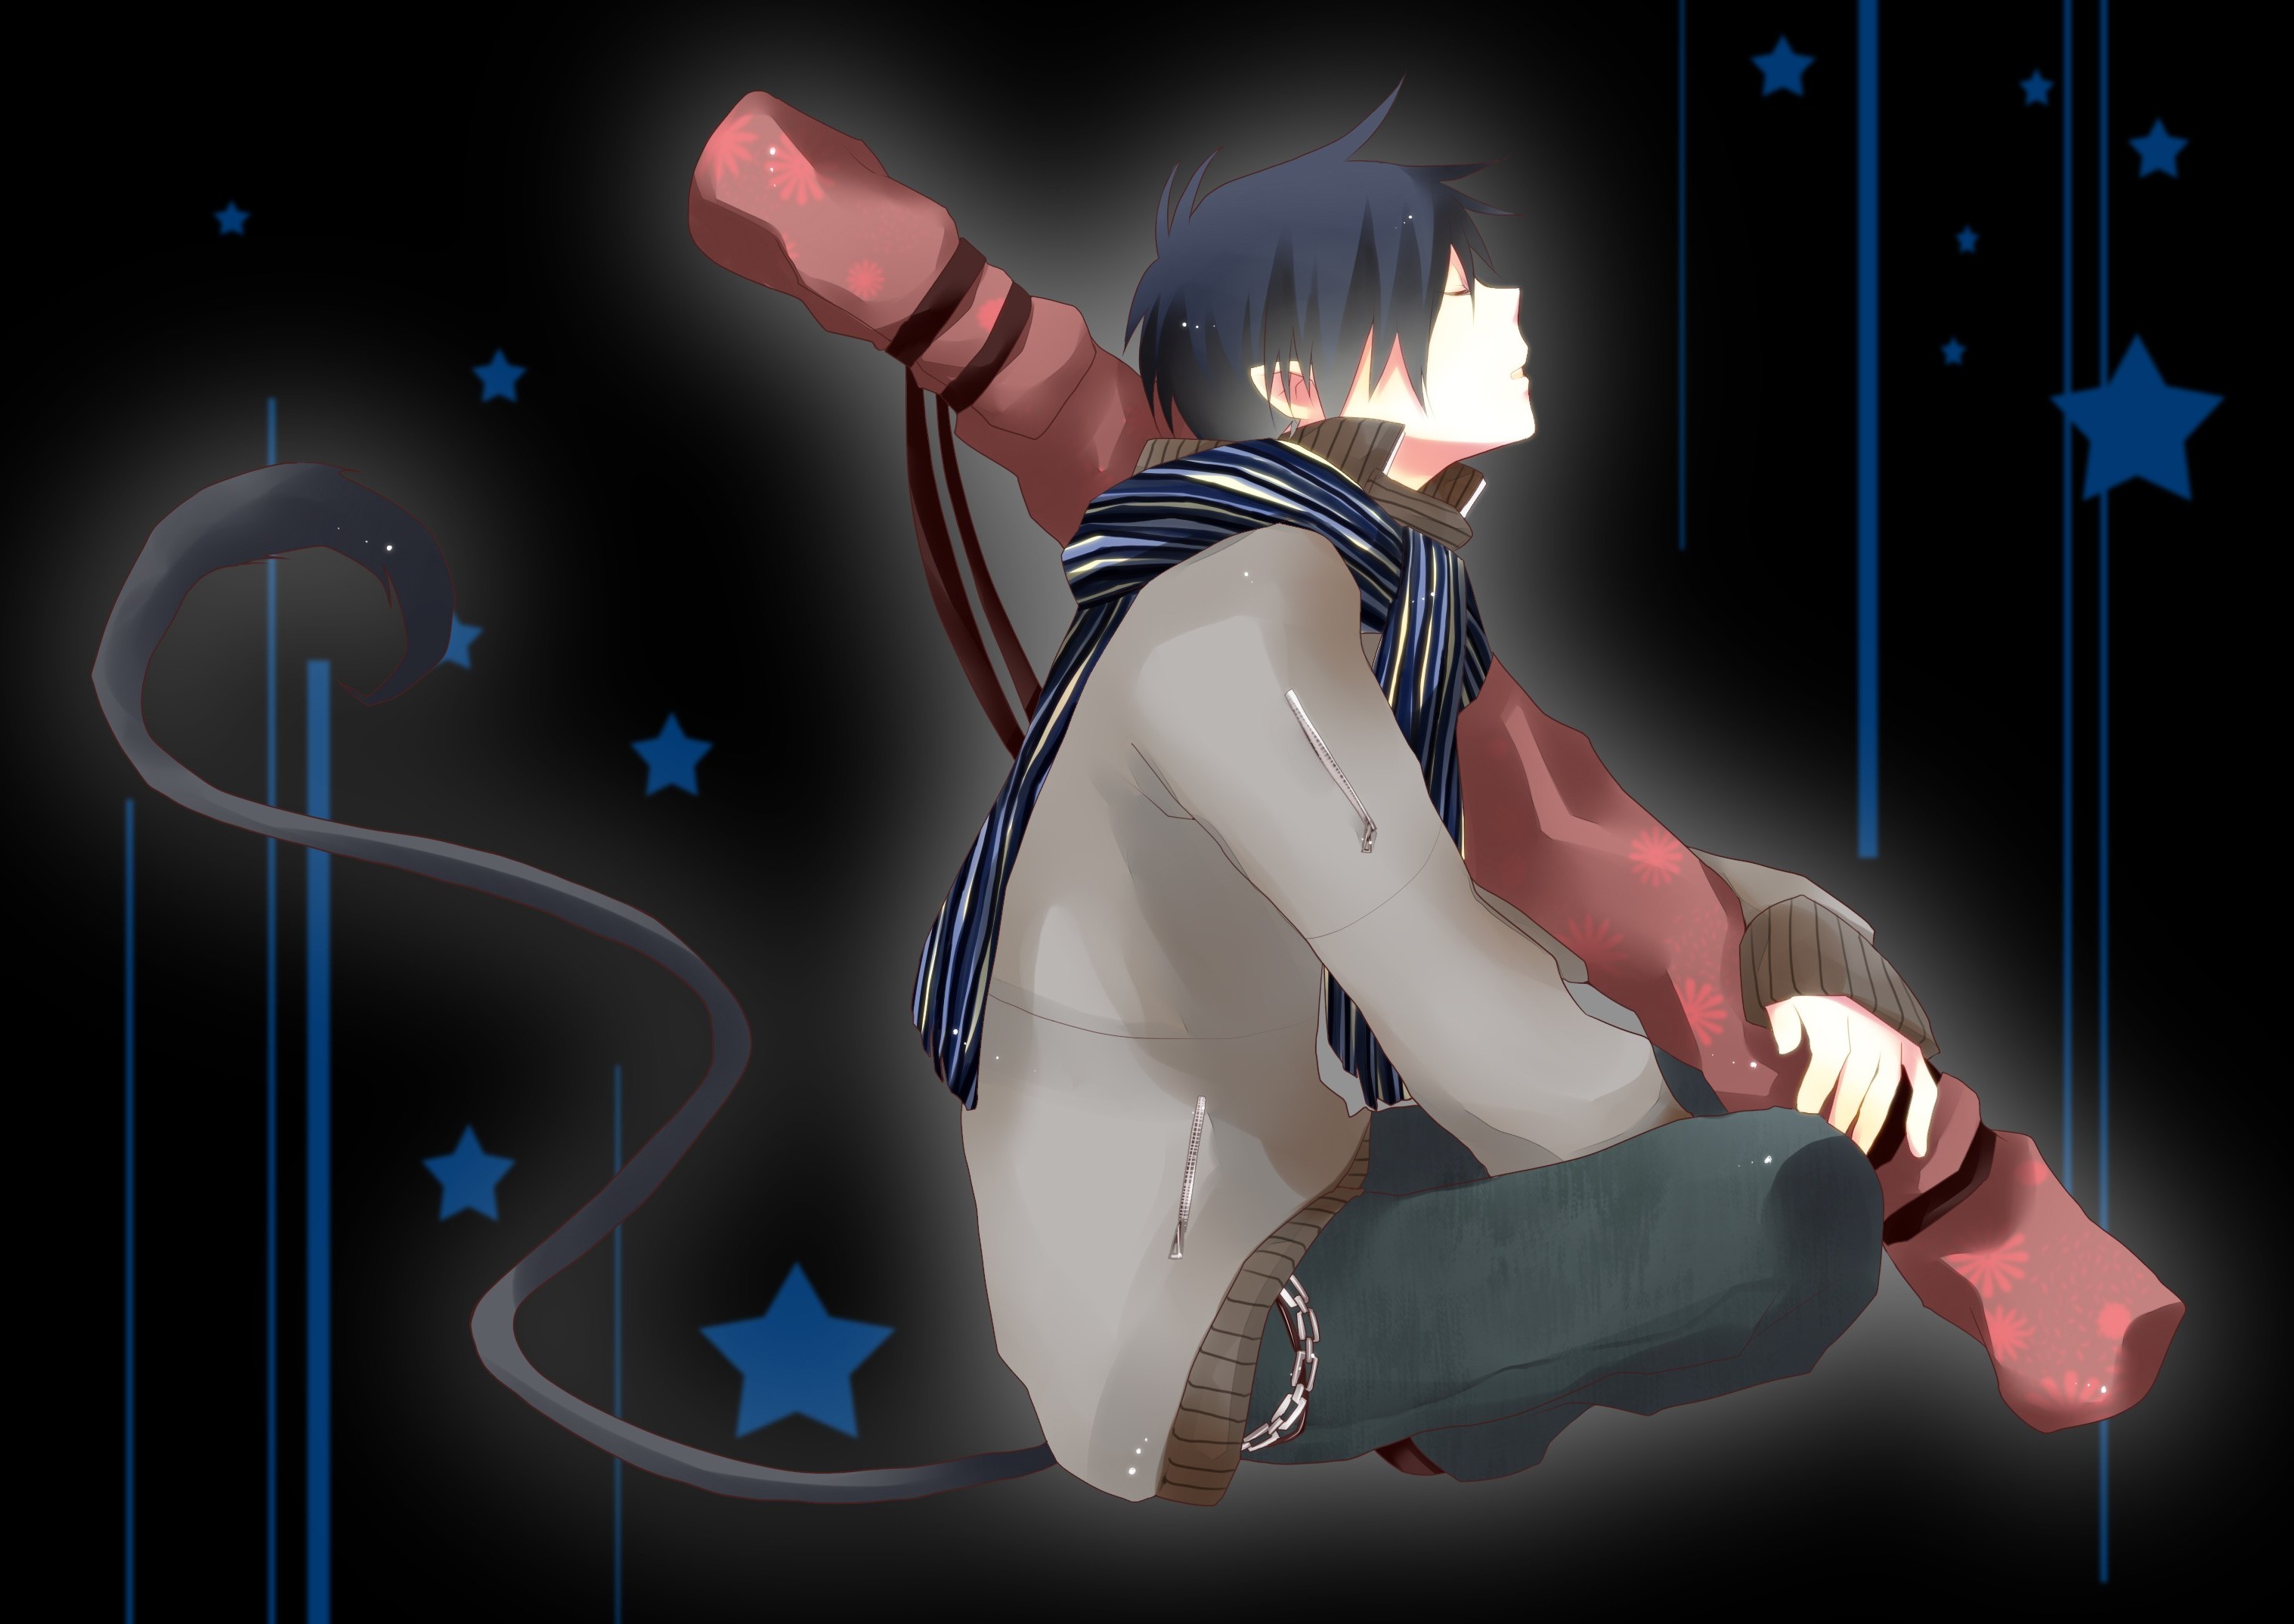 Blue Exorcist - wide 1